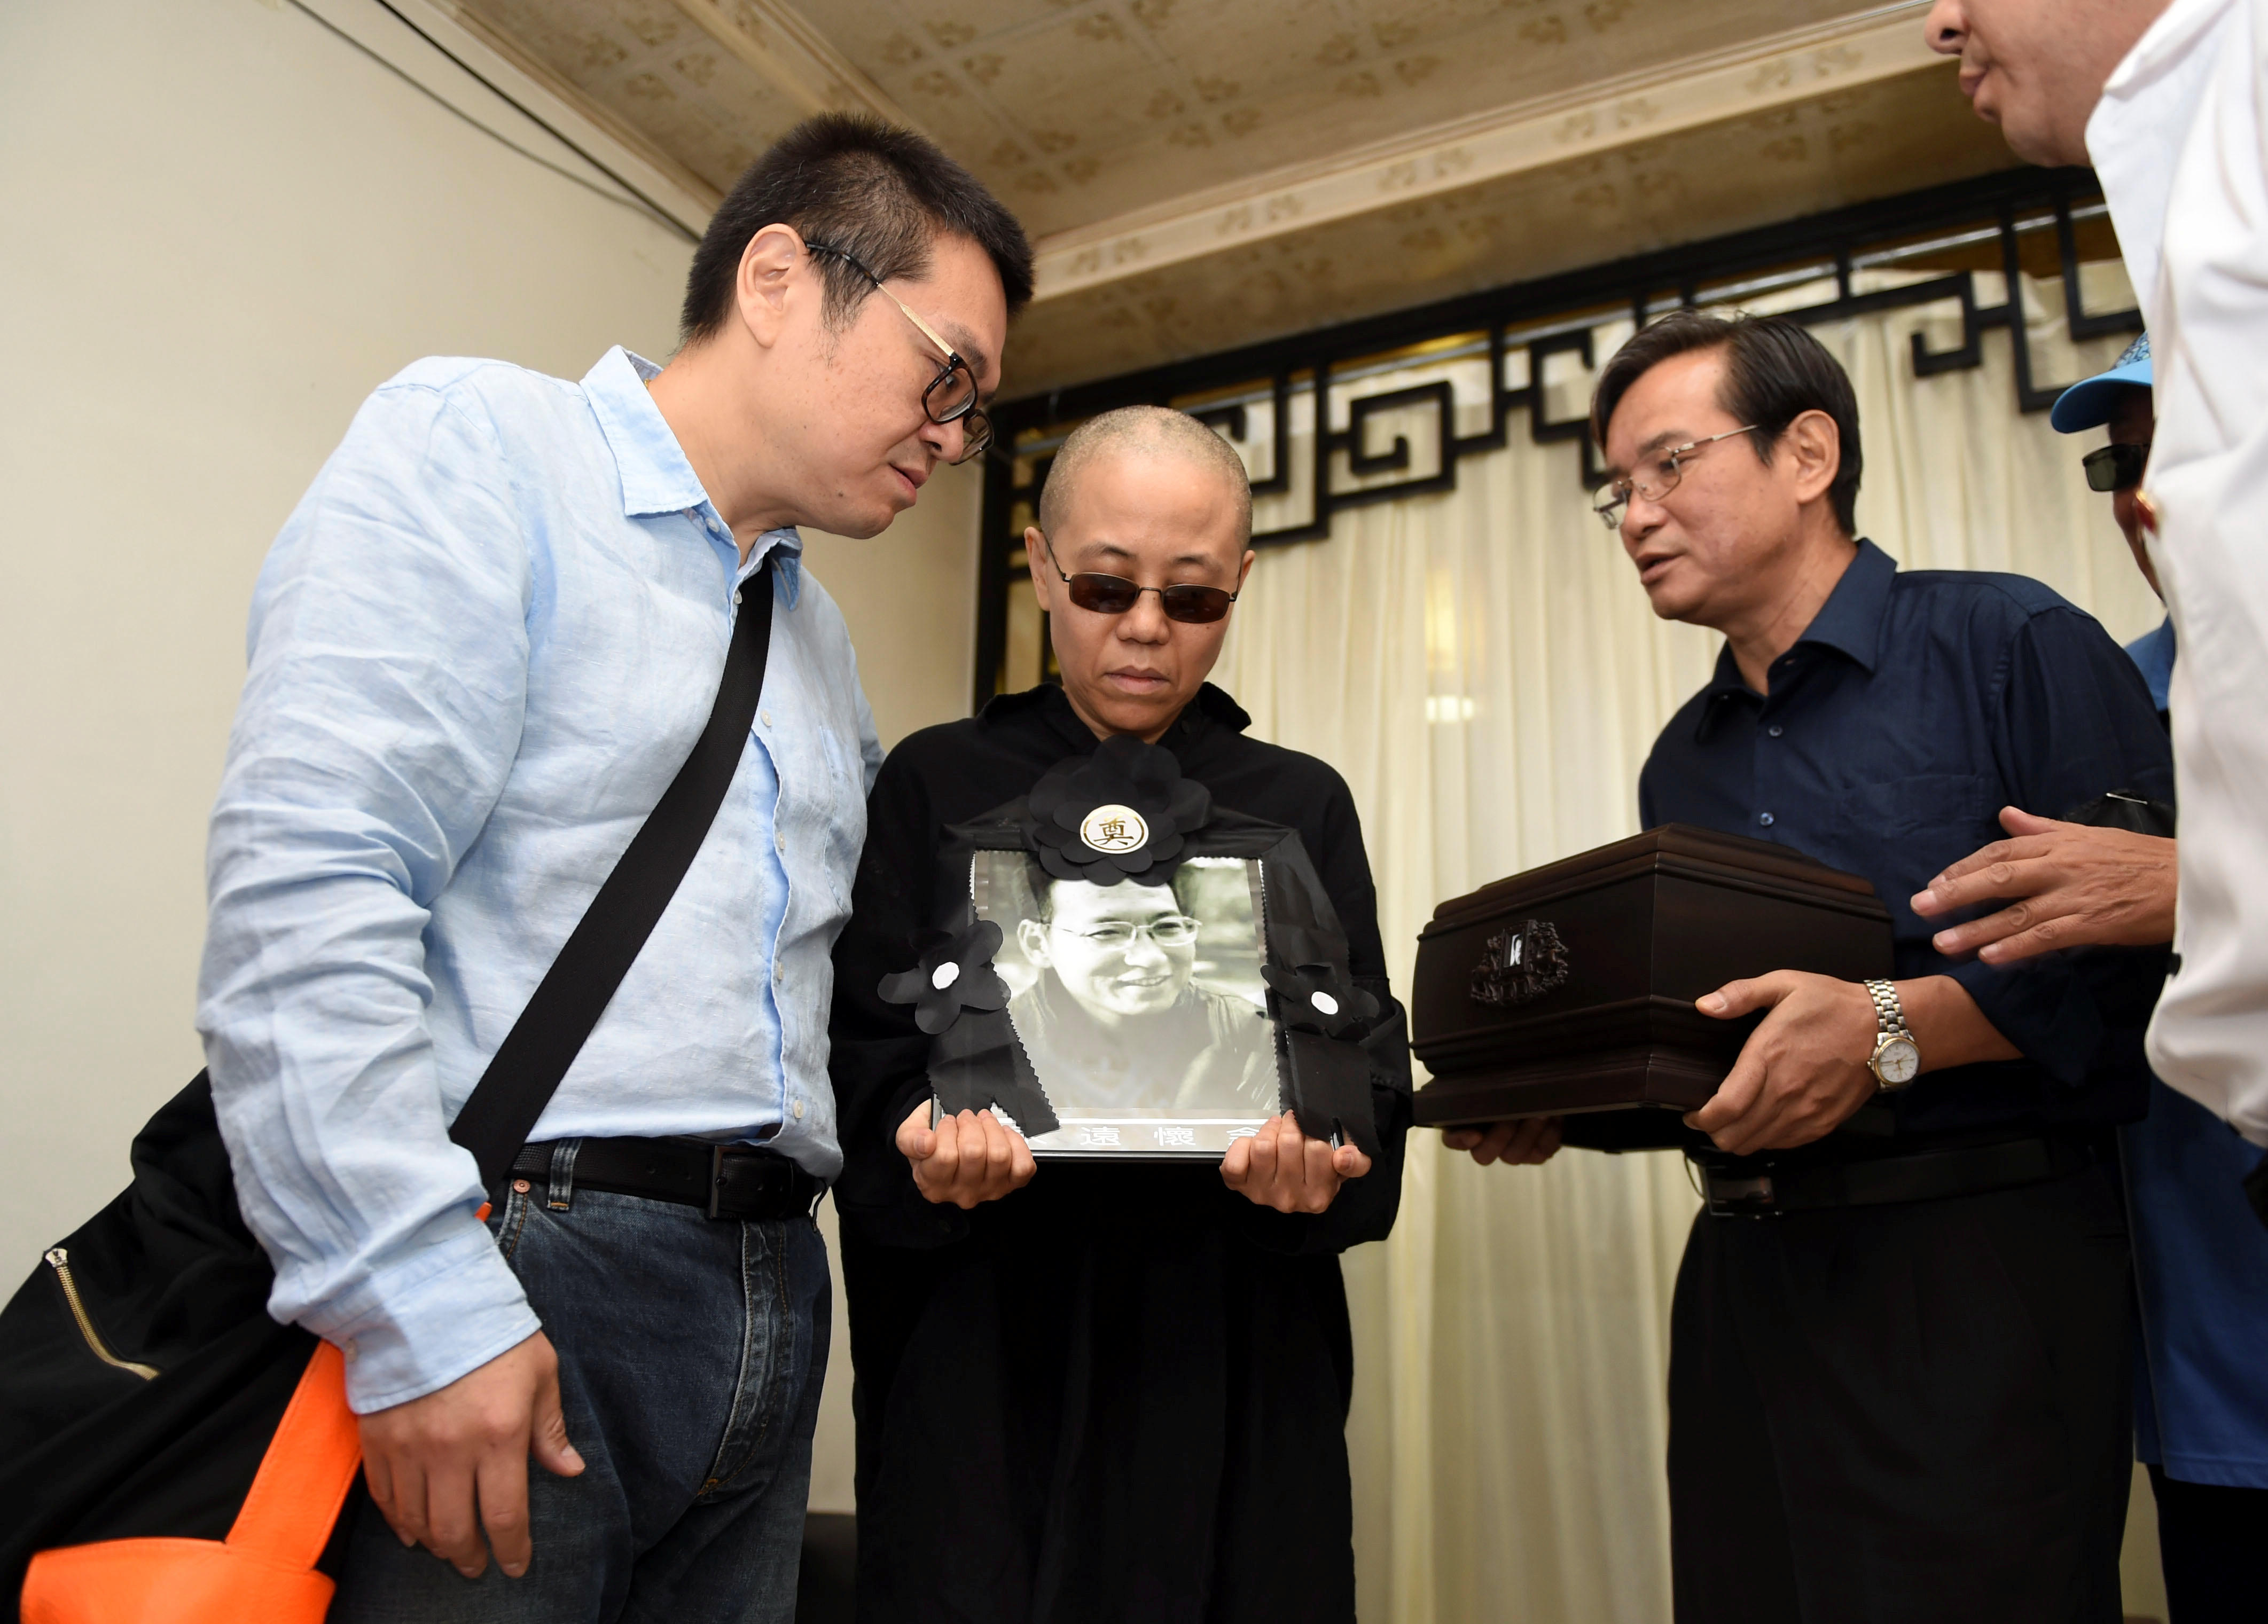 Liu Xia holds a picture of her husband, deceased Chinese Nobel laureate Liu Xiaobo, during his funeral in Shenyang, China on July 15, 2017. (Shenyang Municipal Information Office—Handout/Reuters)